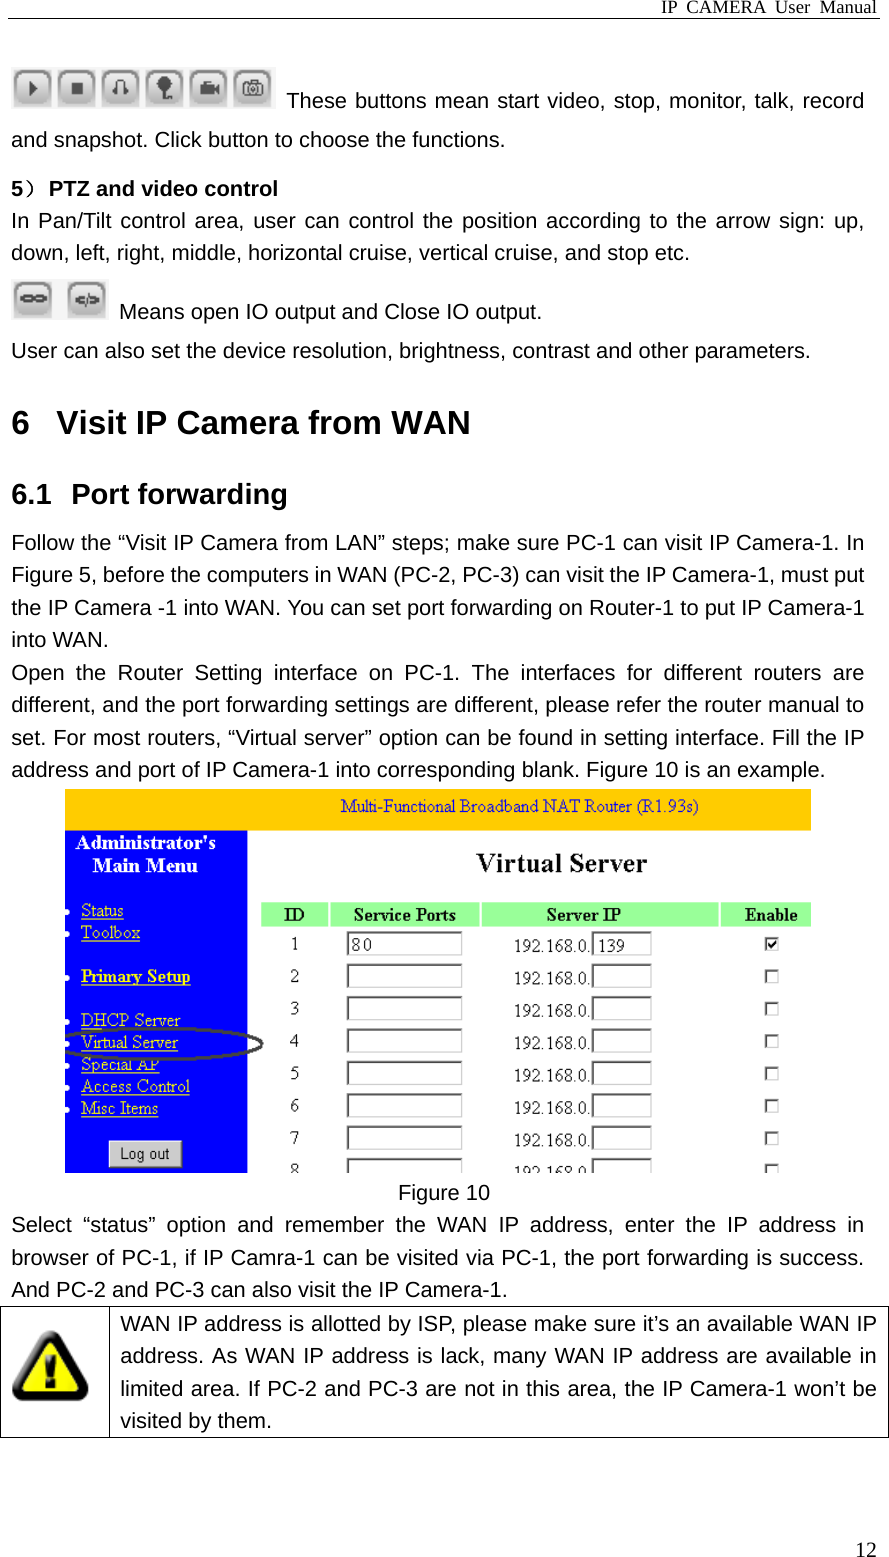 IP CAMERA User Manual  12 These buttons mean start video, stop, monitor, talk, record and snapshot. Click button to choose the functions. 5） PTZ and video control In Pan/Tilt control area, user can control the position according to the arrow sign: up, down, left, right, middle, horizontal cruise, vertical cruise, and stop etc.   Means open IO output and Close IO output. User can also set the device resolution, brightness, contrast and other parameters. 6  Visit IP Camera from WAN 6.1 Port forwarding Follow the “Visit IP Camera from LAN” steps; make sure PC-1 can visit IP Camera-1. In Figure 5, before the computers in WAN (PC-2, PC-3) can visit the IP Camera-1, must put the IP Camera -1 into WAN. You can set port forwarding on Router-1 to put IP Camera-1 into WAN. Open the Router Setting interface on PC-1. The interfaces for different routers are different, and the port forwarding settings are different, please refer the router manual to set. For most routers, “Virtual server” option can be found in setting interface. Fill the IP address and port of IP Camera-1 into corresponding blank. Figure 10 is an example.  Figure 10 Select “status” option and remember the WAN IP address, enter the IP address in browser of PC-1, if IP Camra-1 can be visited via PC-1, the port forwarding is success. And PC-2 and PC-3 can also visit the IP Camera-1.  WAN IP address is allotted by ISP, please make sure it’s an available WAN IP address. As WAN IP address is lack, many WAN IP address are available in limited area. If PC-2 and PC-3 are not in this area, the IP Camera-1 won’t be visited by them.  